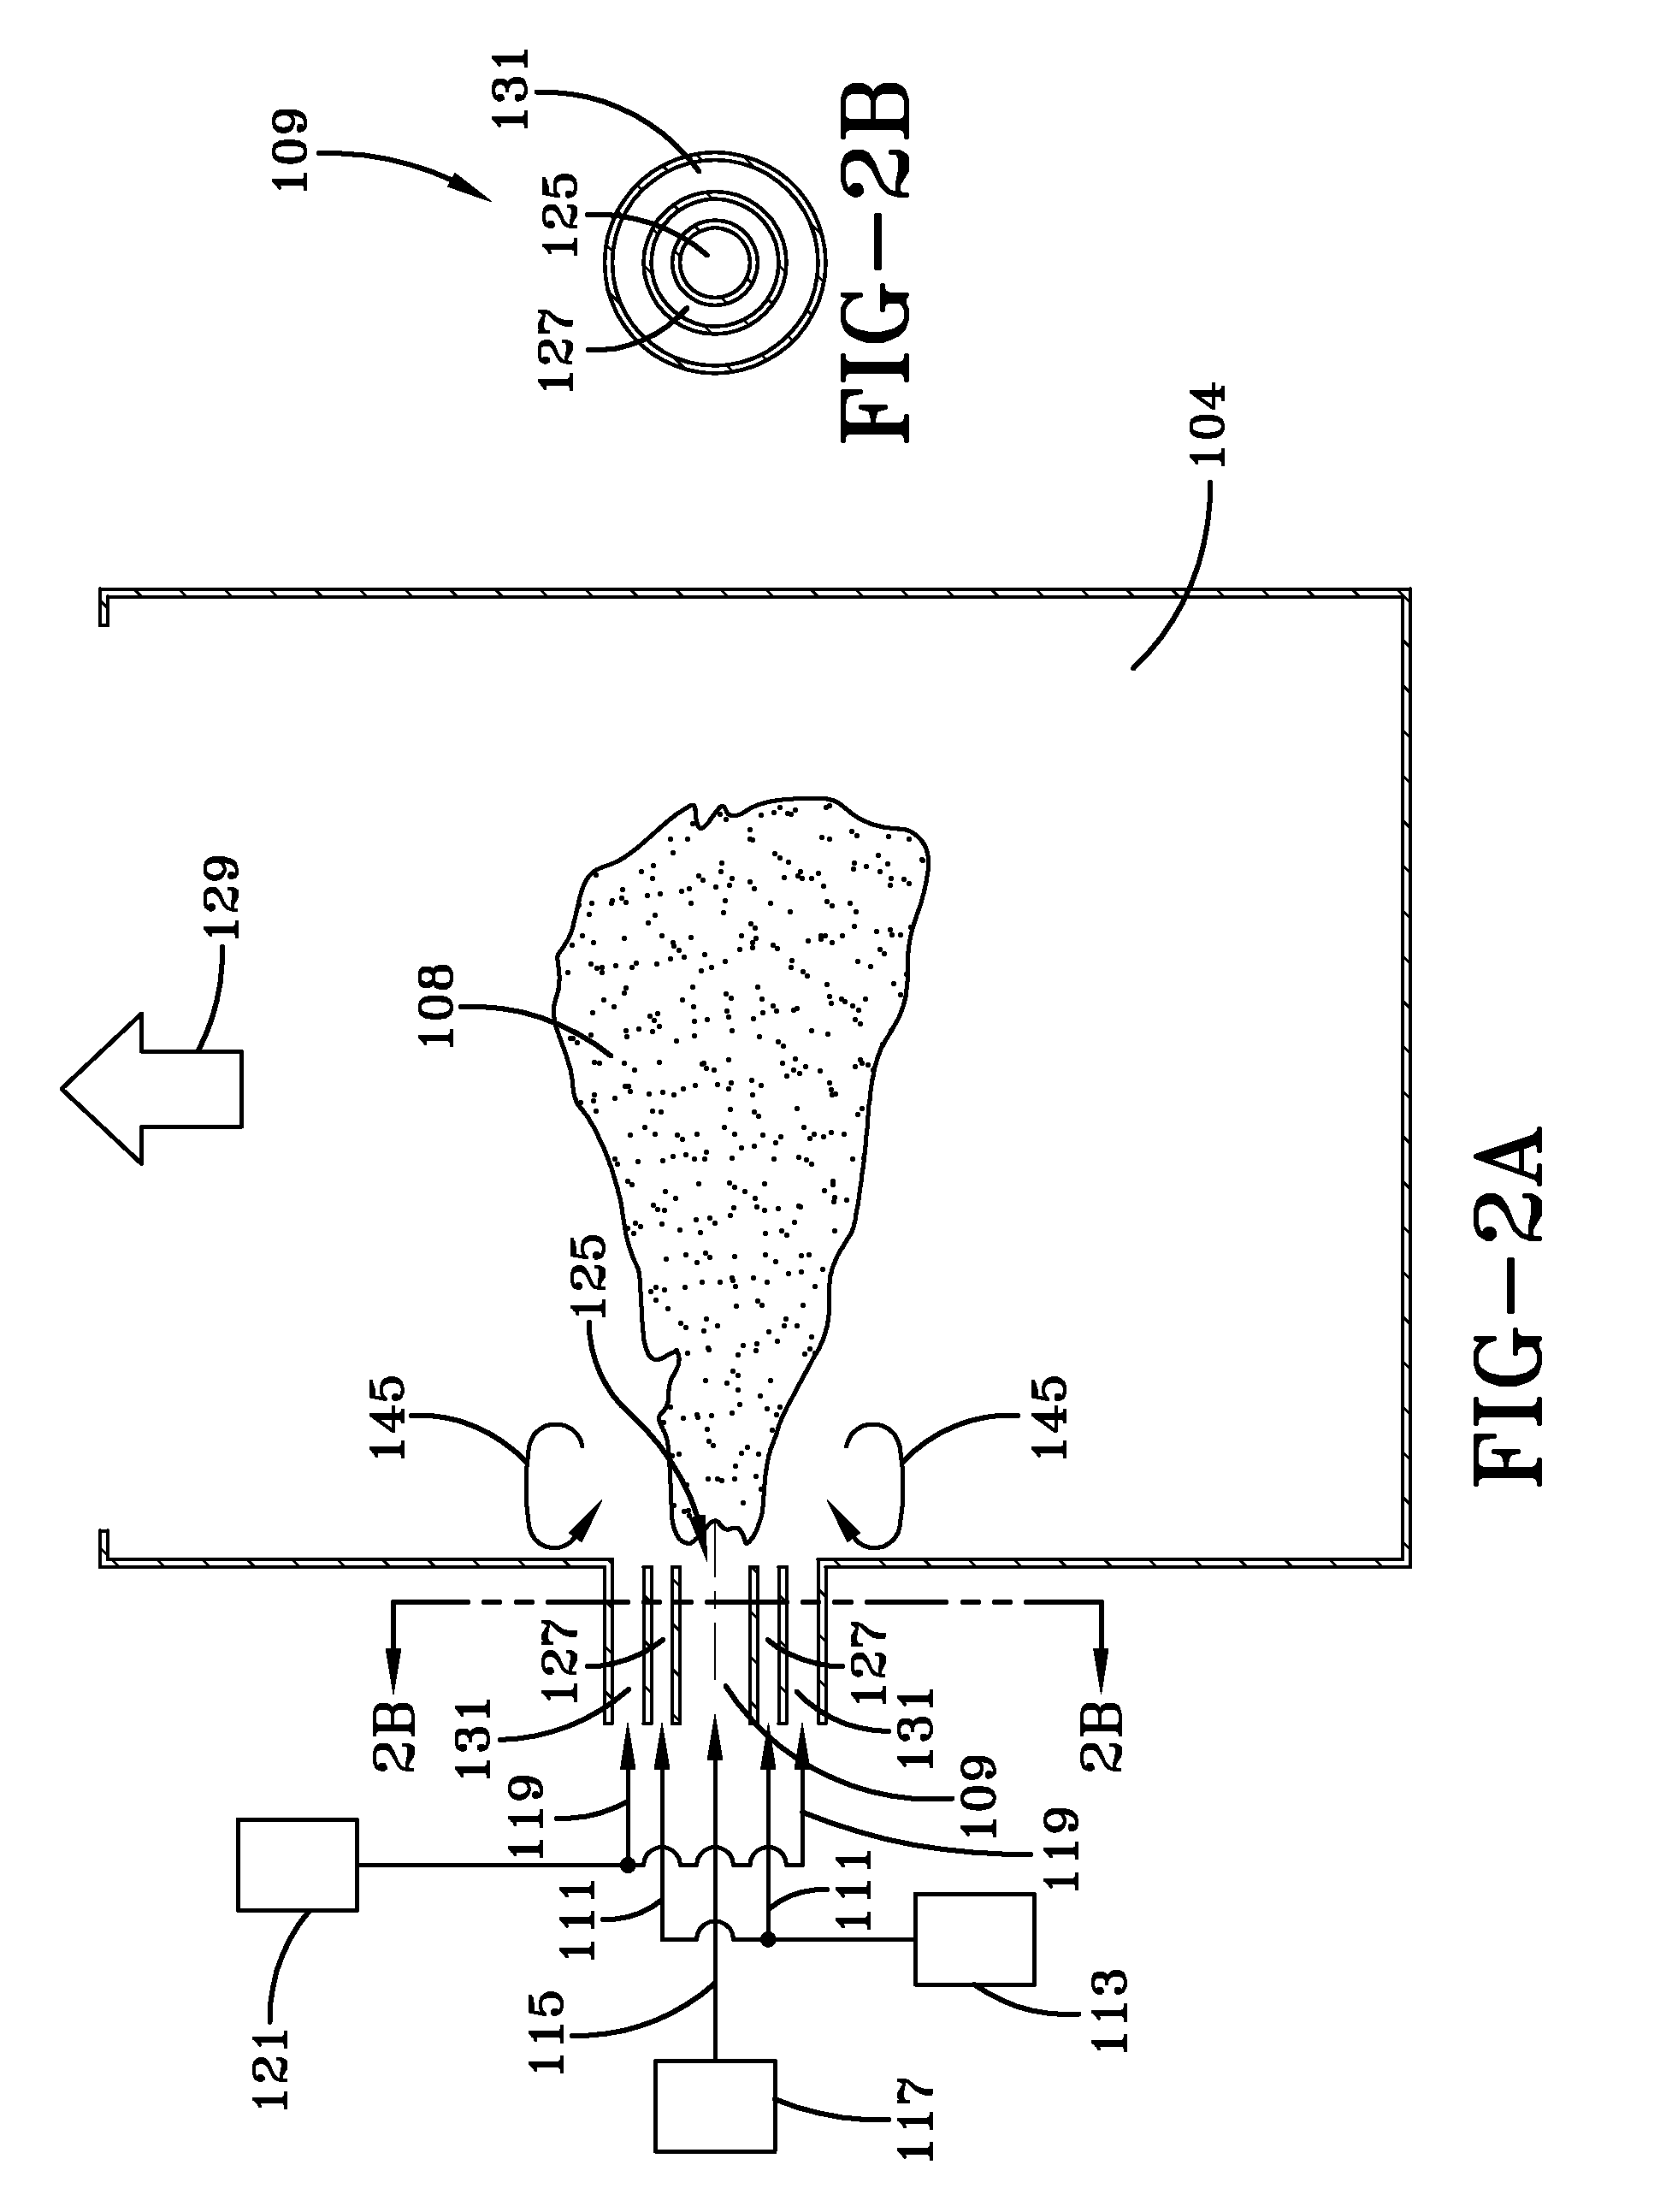 Combustion system with precombustor